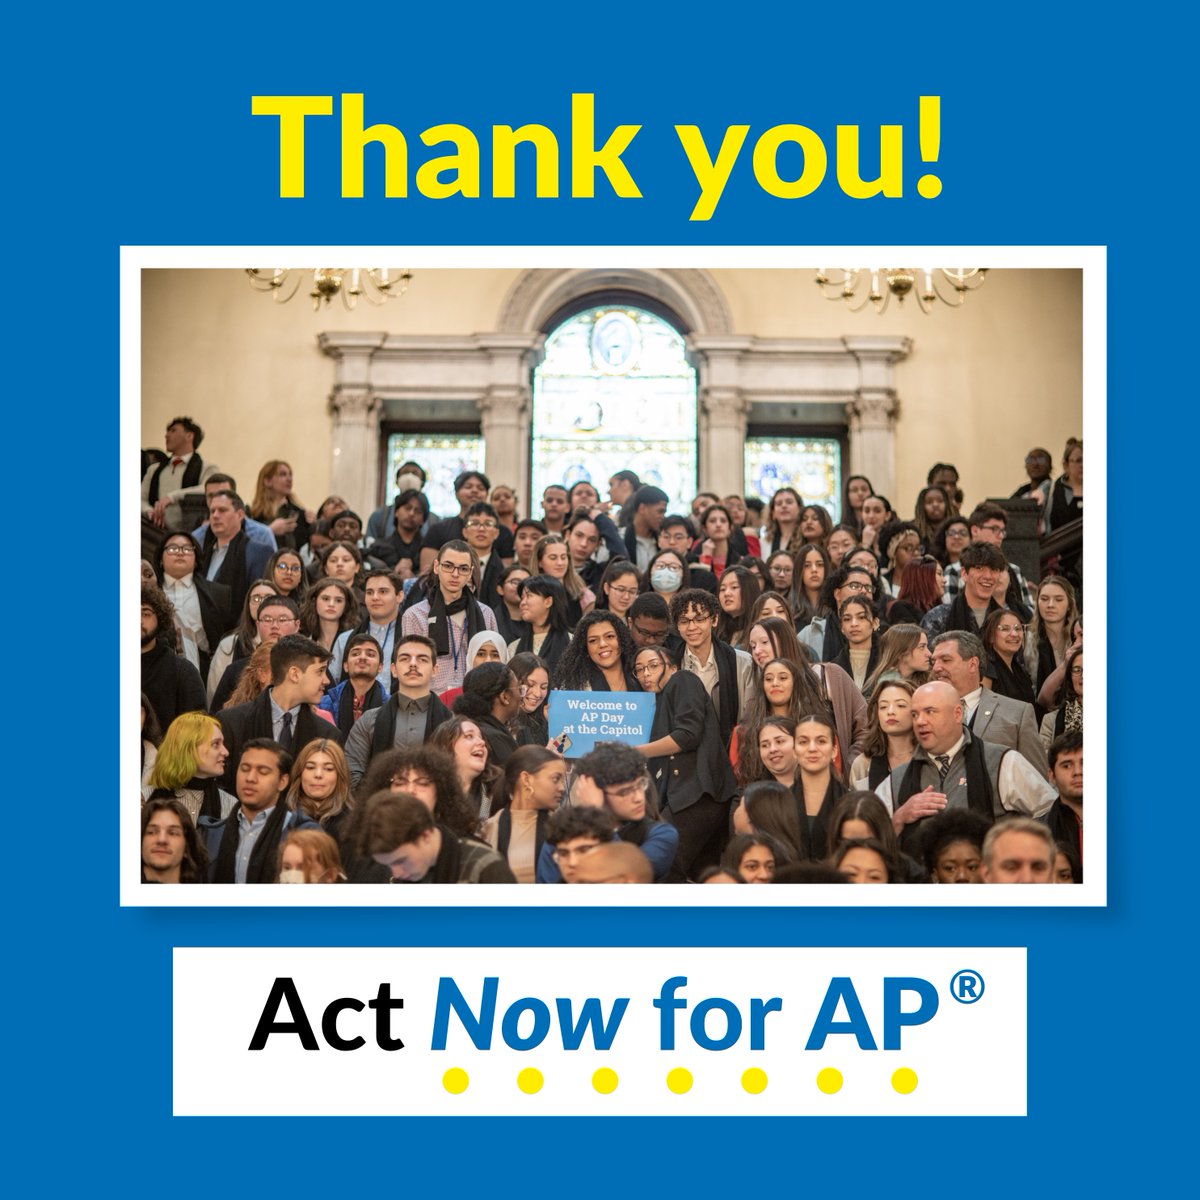 BREAKING NEWS: The FY25 House Ways & Means budget restores funding for the AP STEM & English program to $3.4M. Thank you to @RonMariano and @RepMichlewitz for supporting 10K AP students, 600 AP teachers, and @MassInsightEdu public/private partnership advancing AP equity in MA.